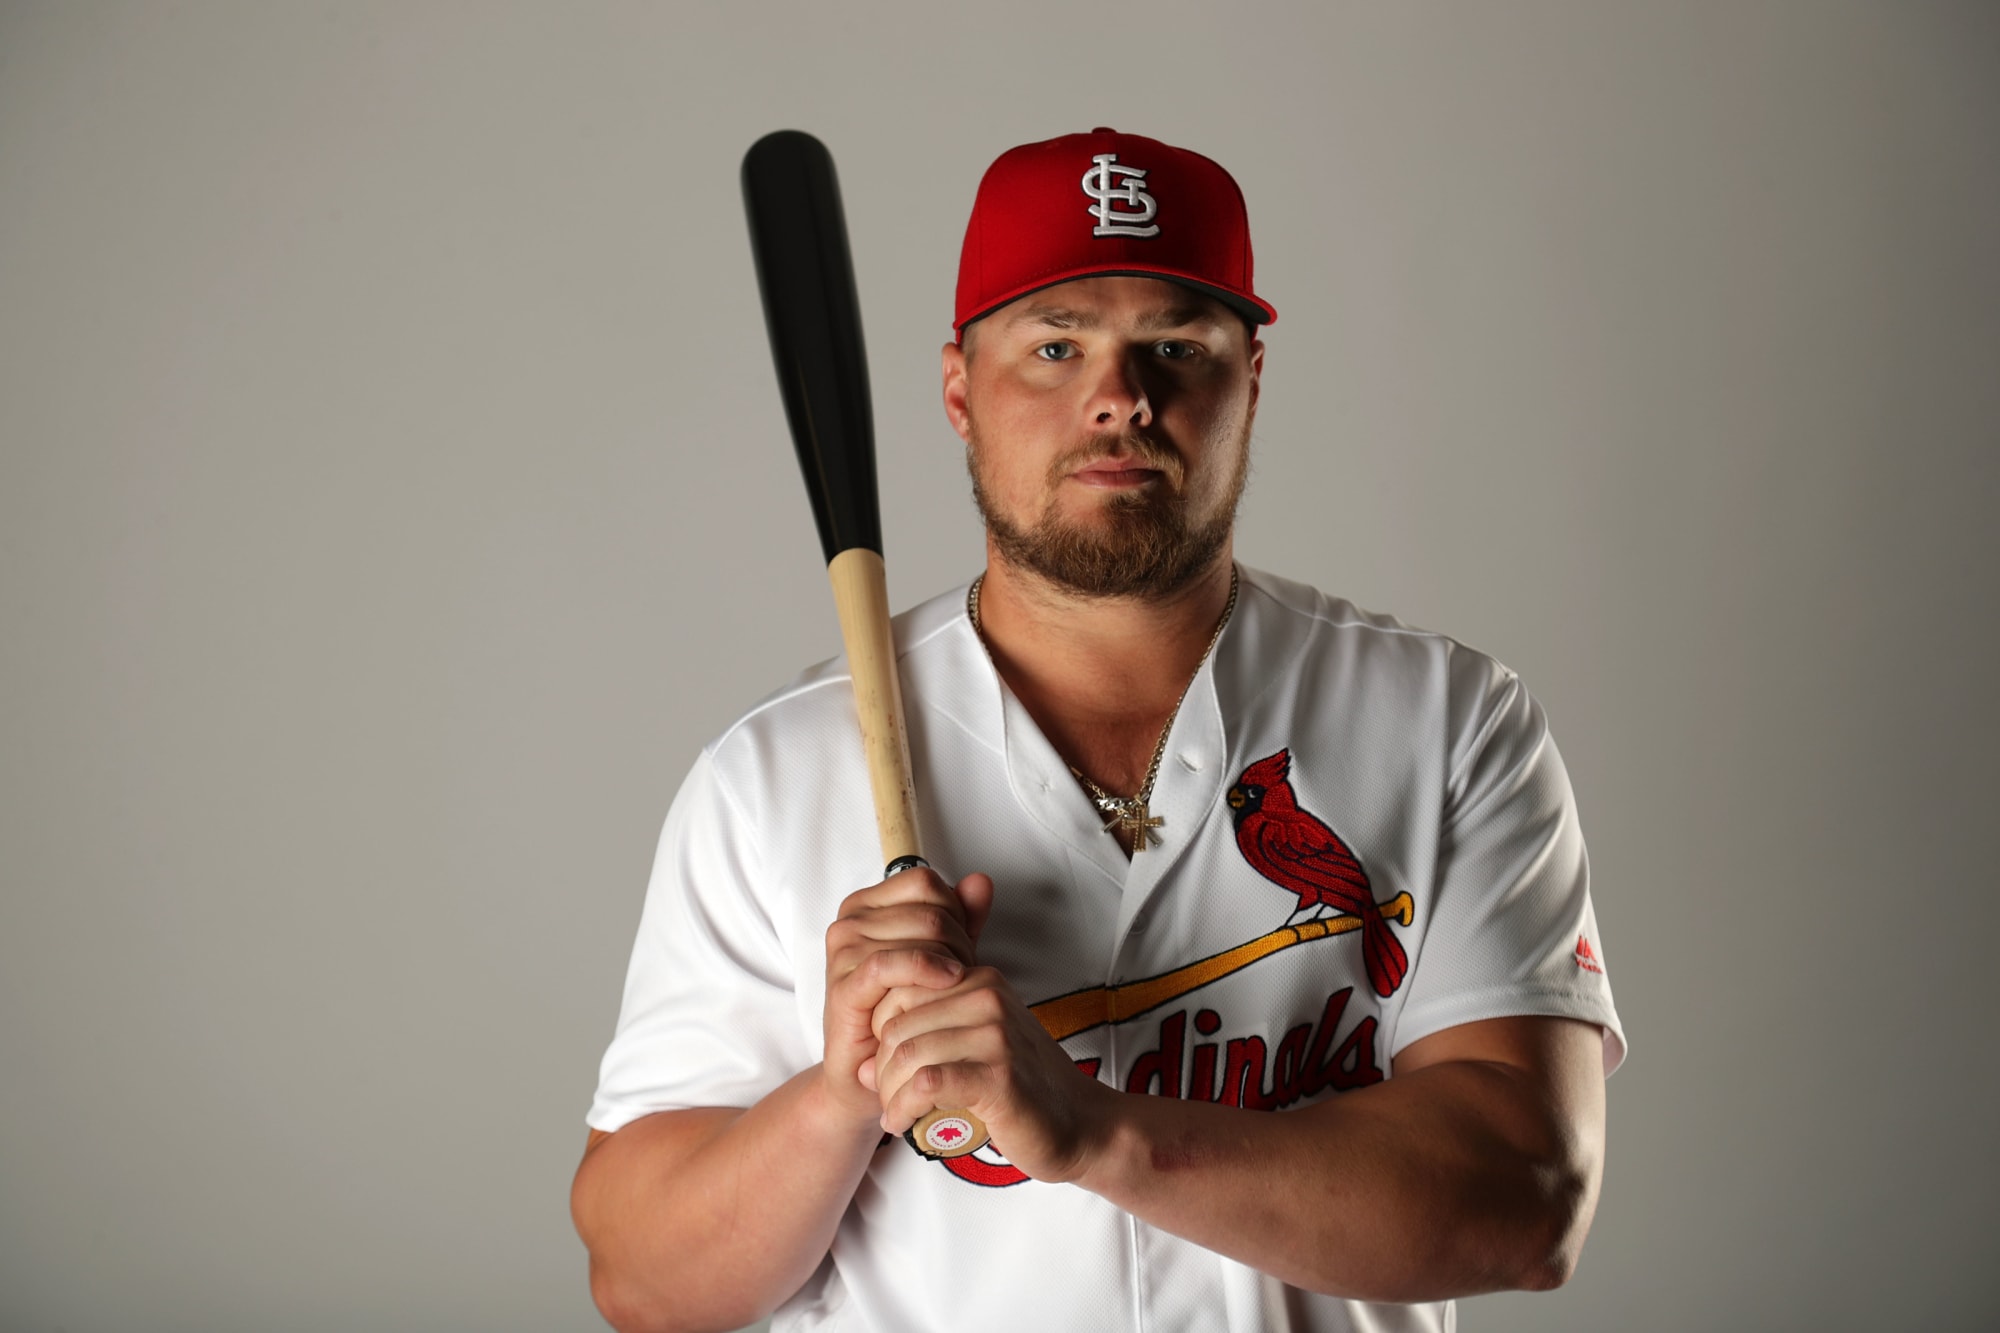 St. Louis Cardinals: Luke Voit making the most of his opportunity